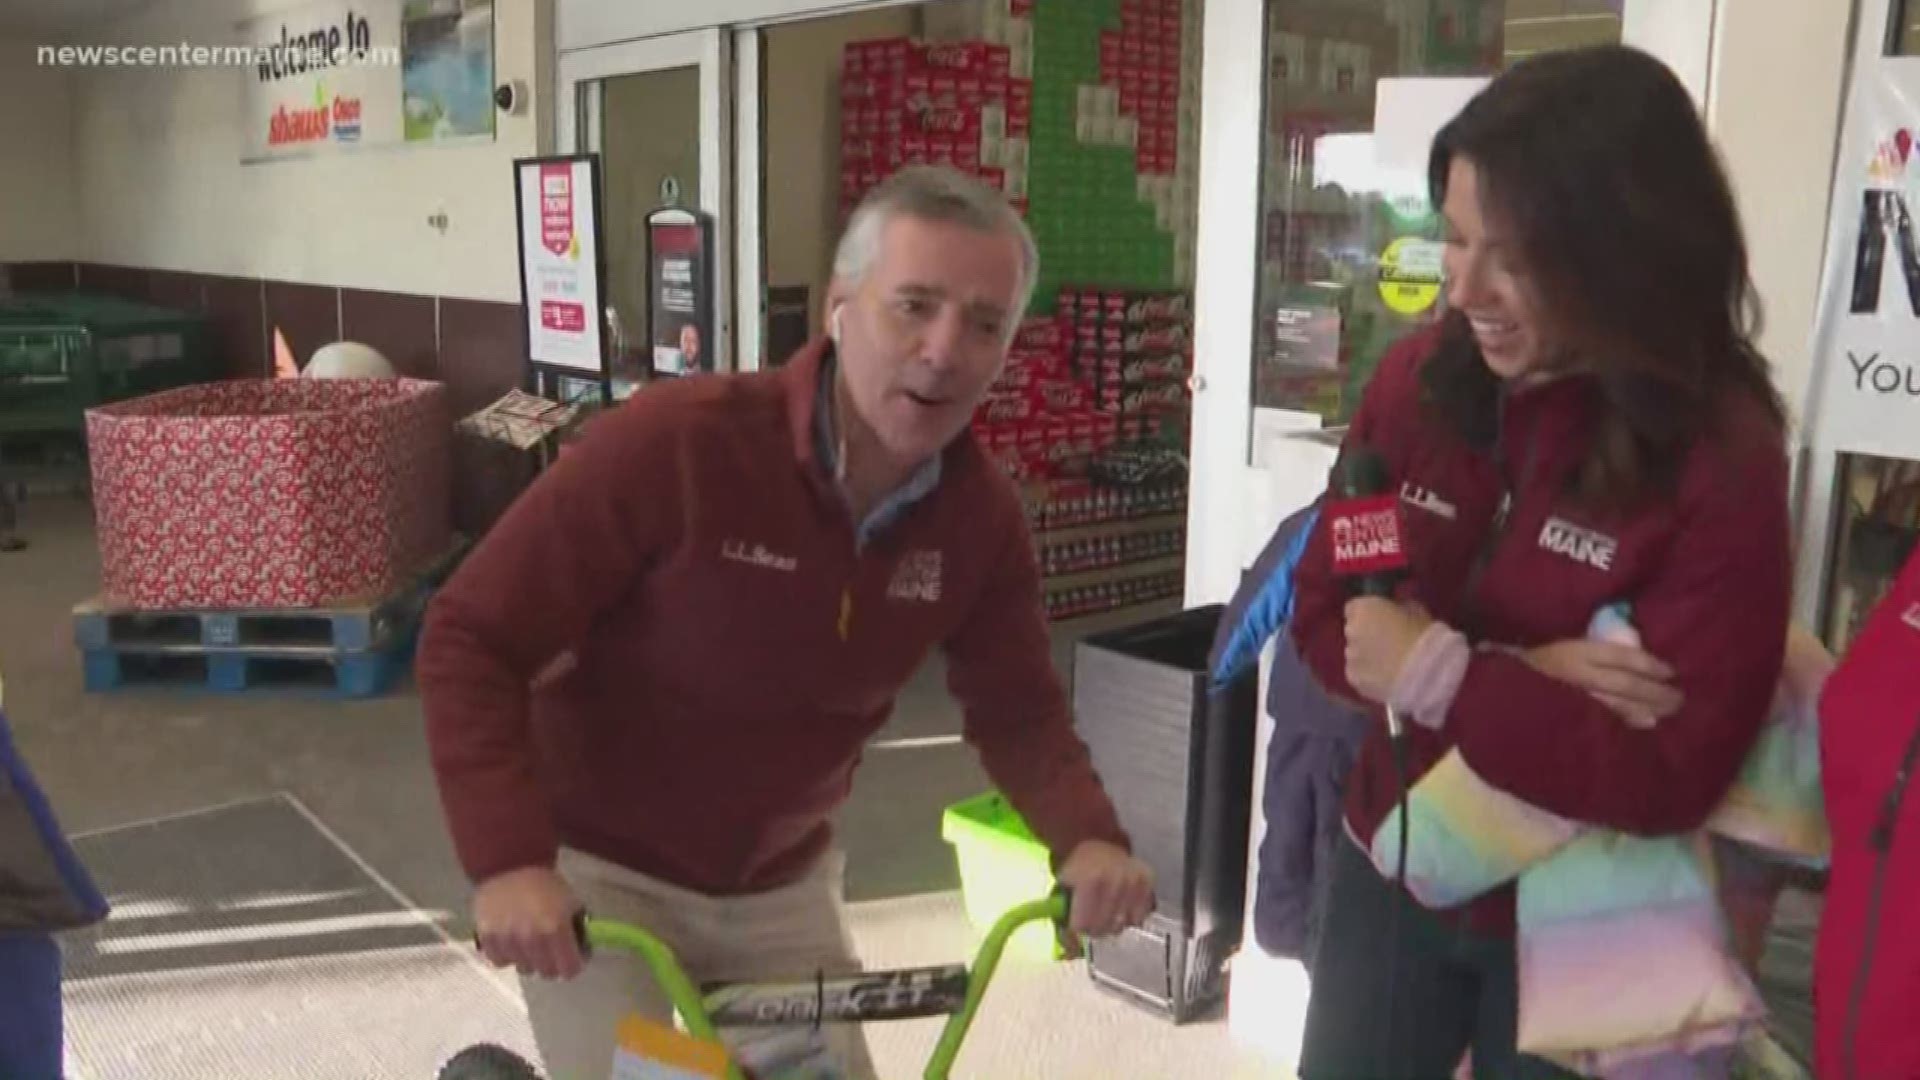 Rob Caldwell got in the spirit of Coats and Toys for Kids by riding one of the donated kids bikes